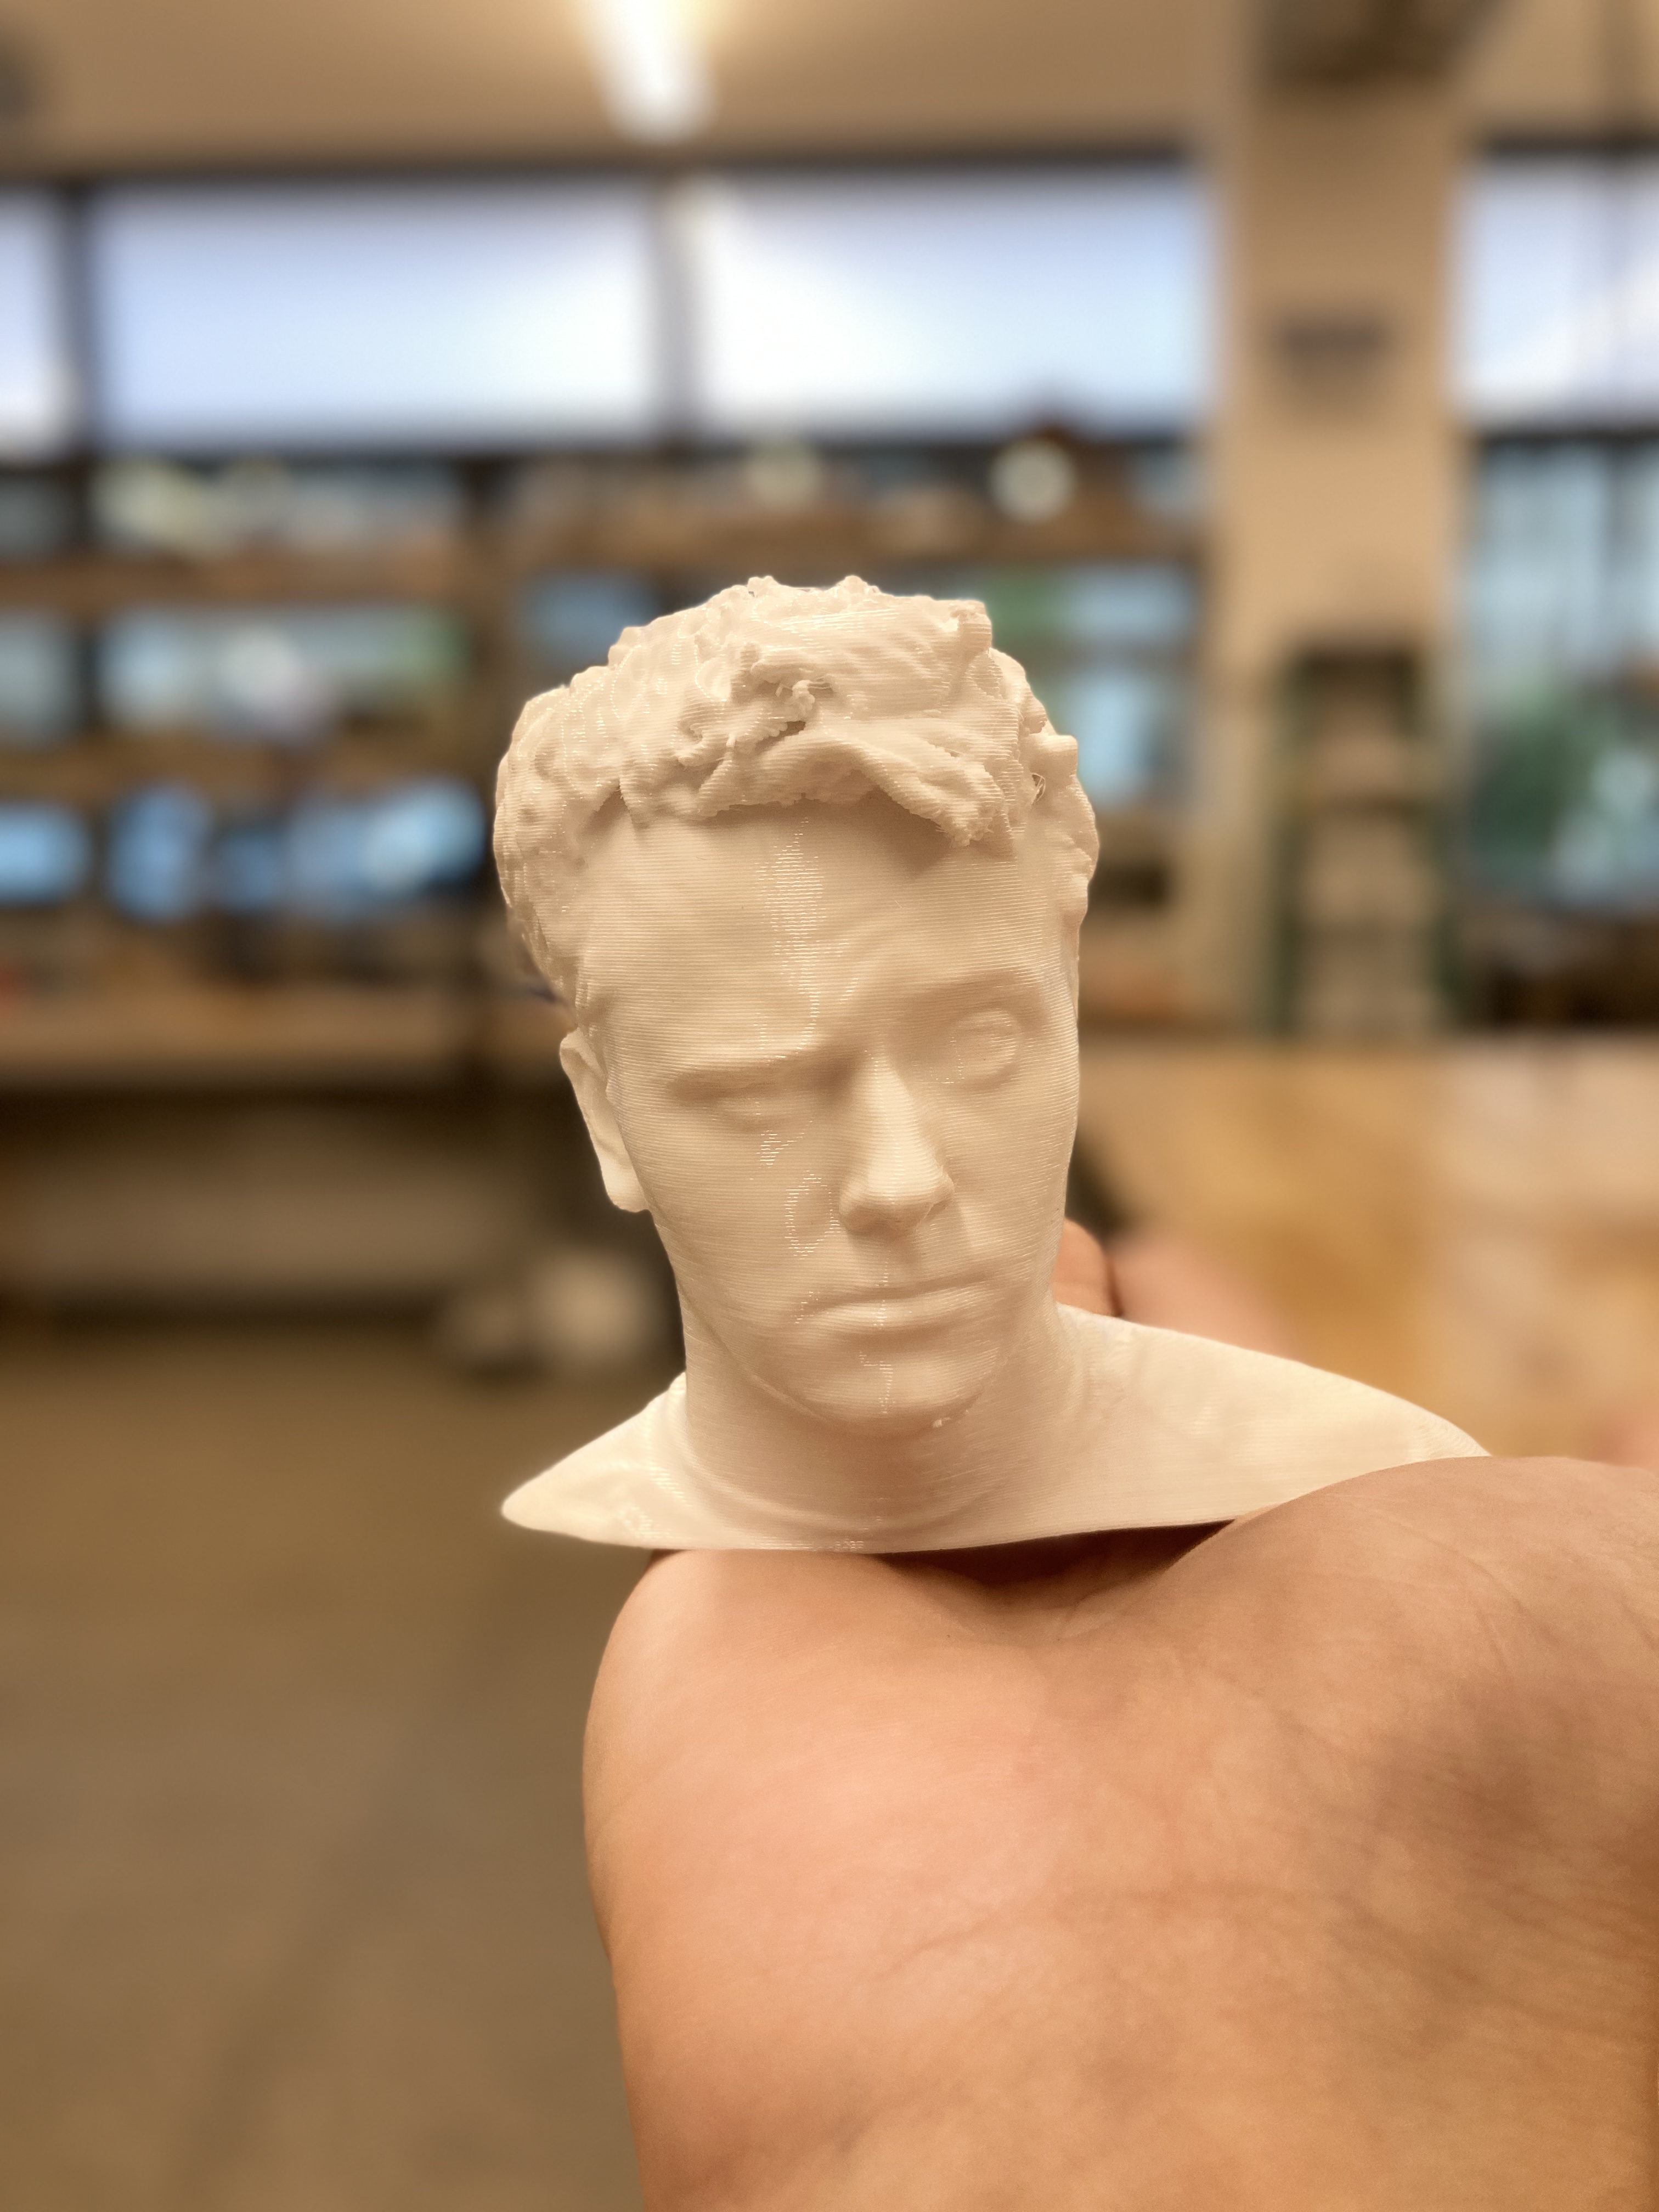 3D Print of a Scanned Human